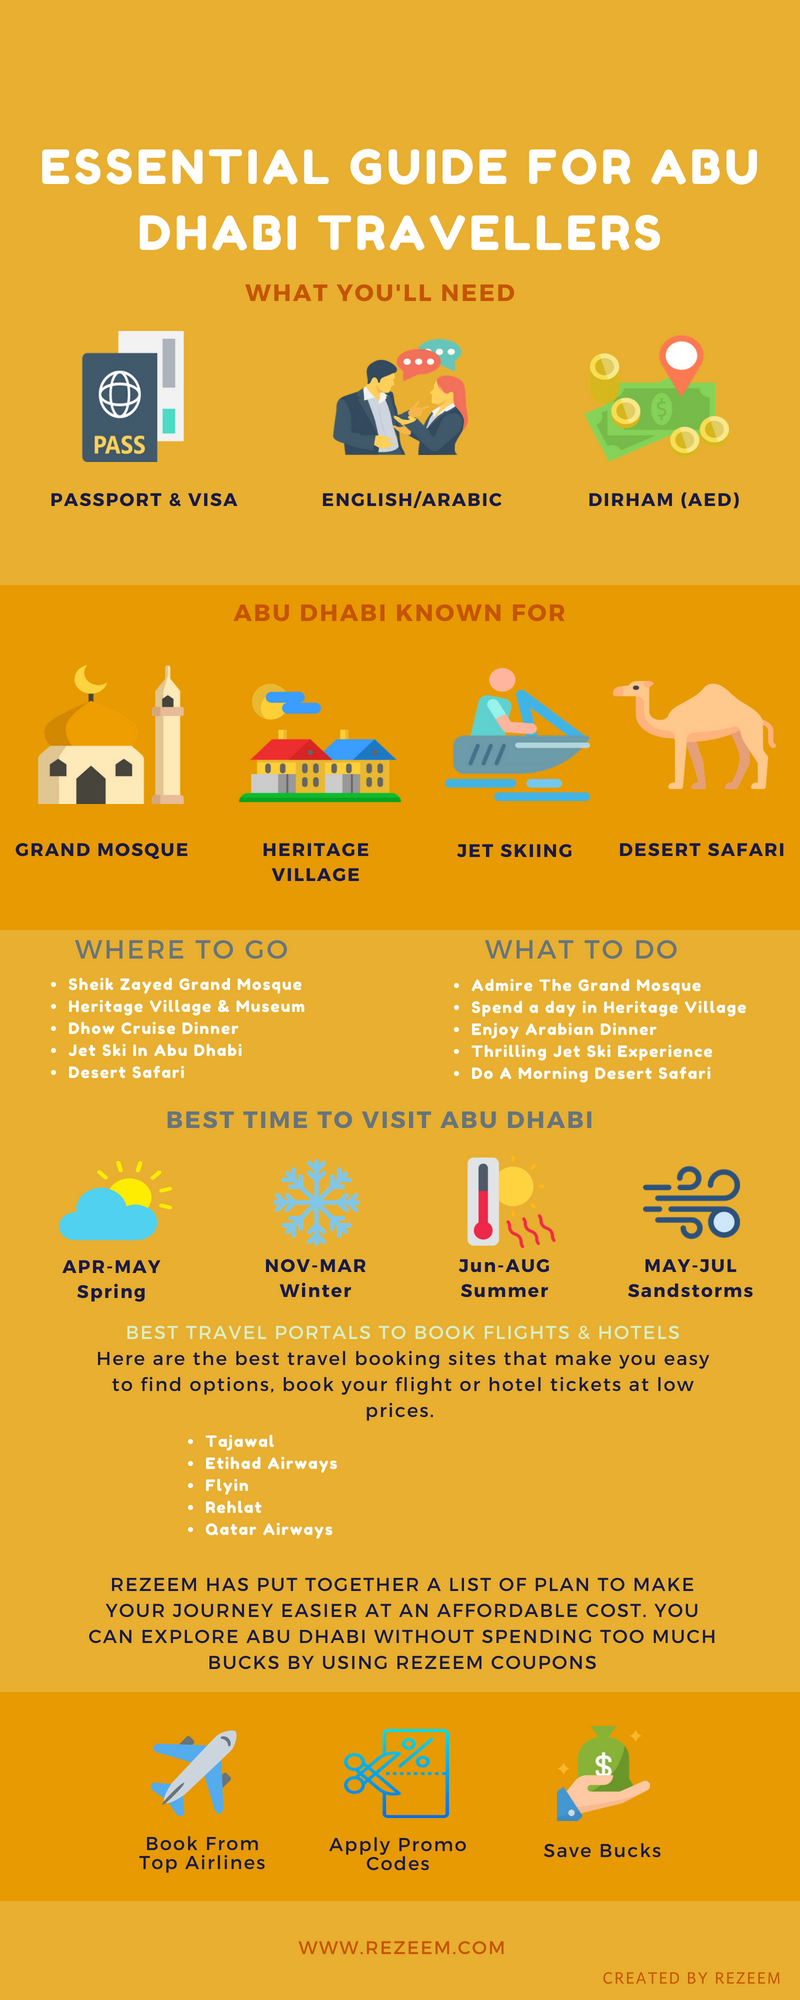 Essential Guide for Abu Dhabi Travellers